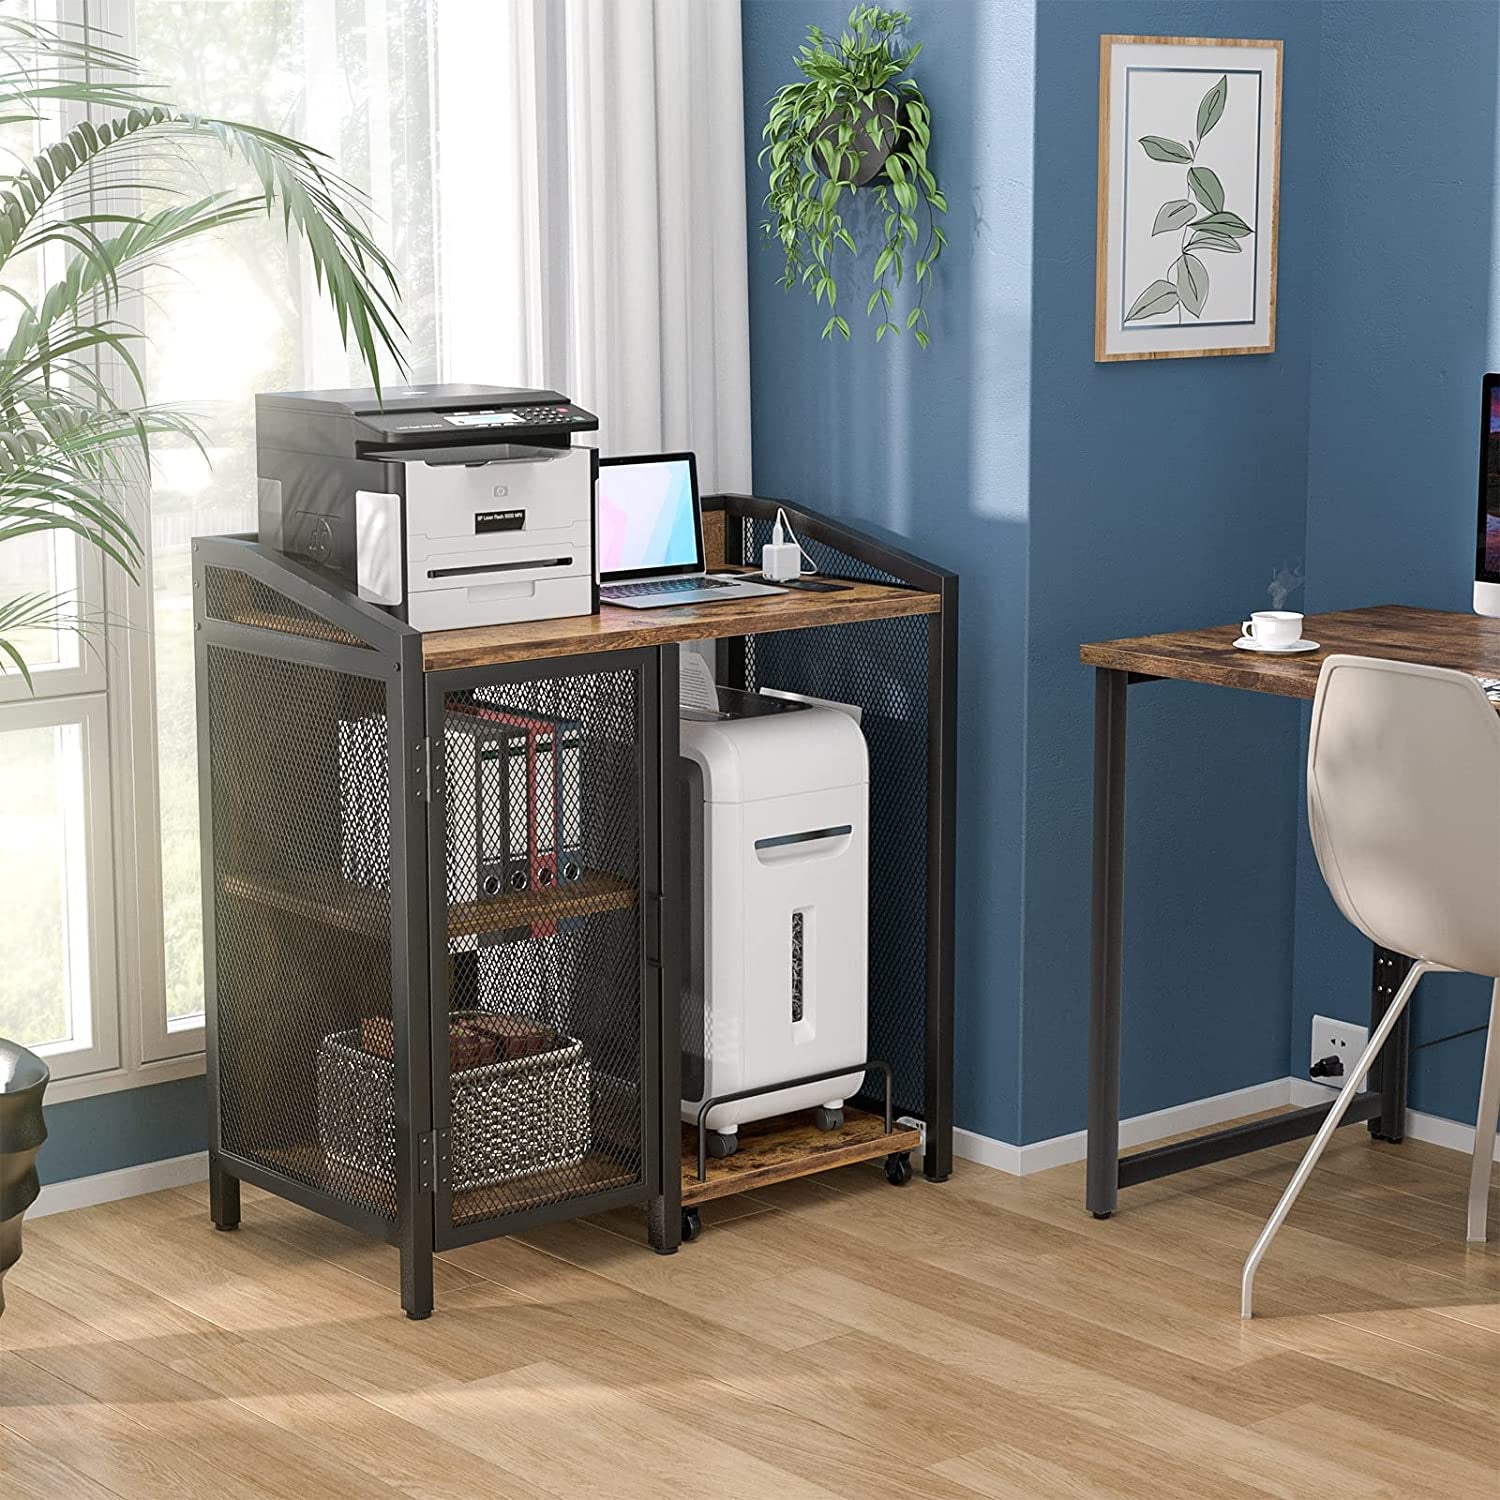 Rustic Brown 3-Tier Lateral Office Filing Cabinets with Integrated Socket and USB Charging Port, Contemporary Printer Stand and Paper Shredder Stand Rack with Mobility Wheels and Open Storage Shelves